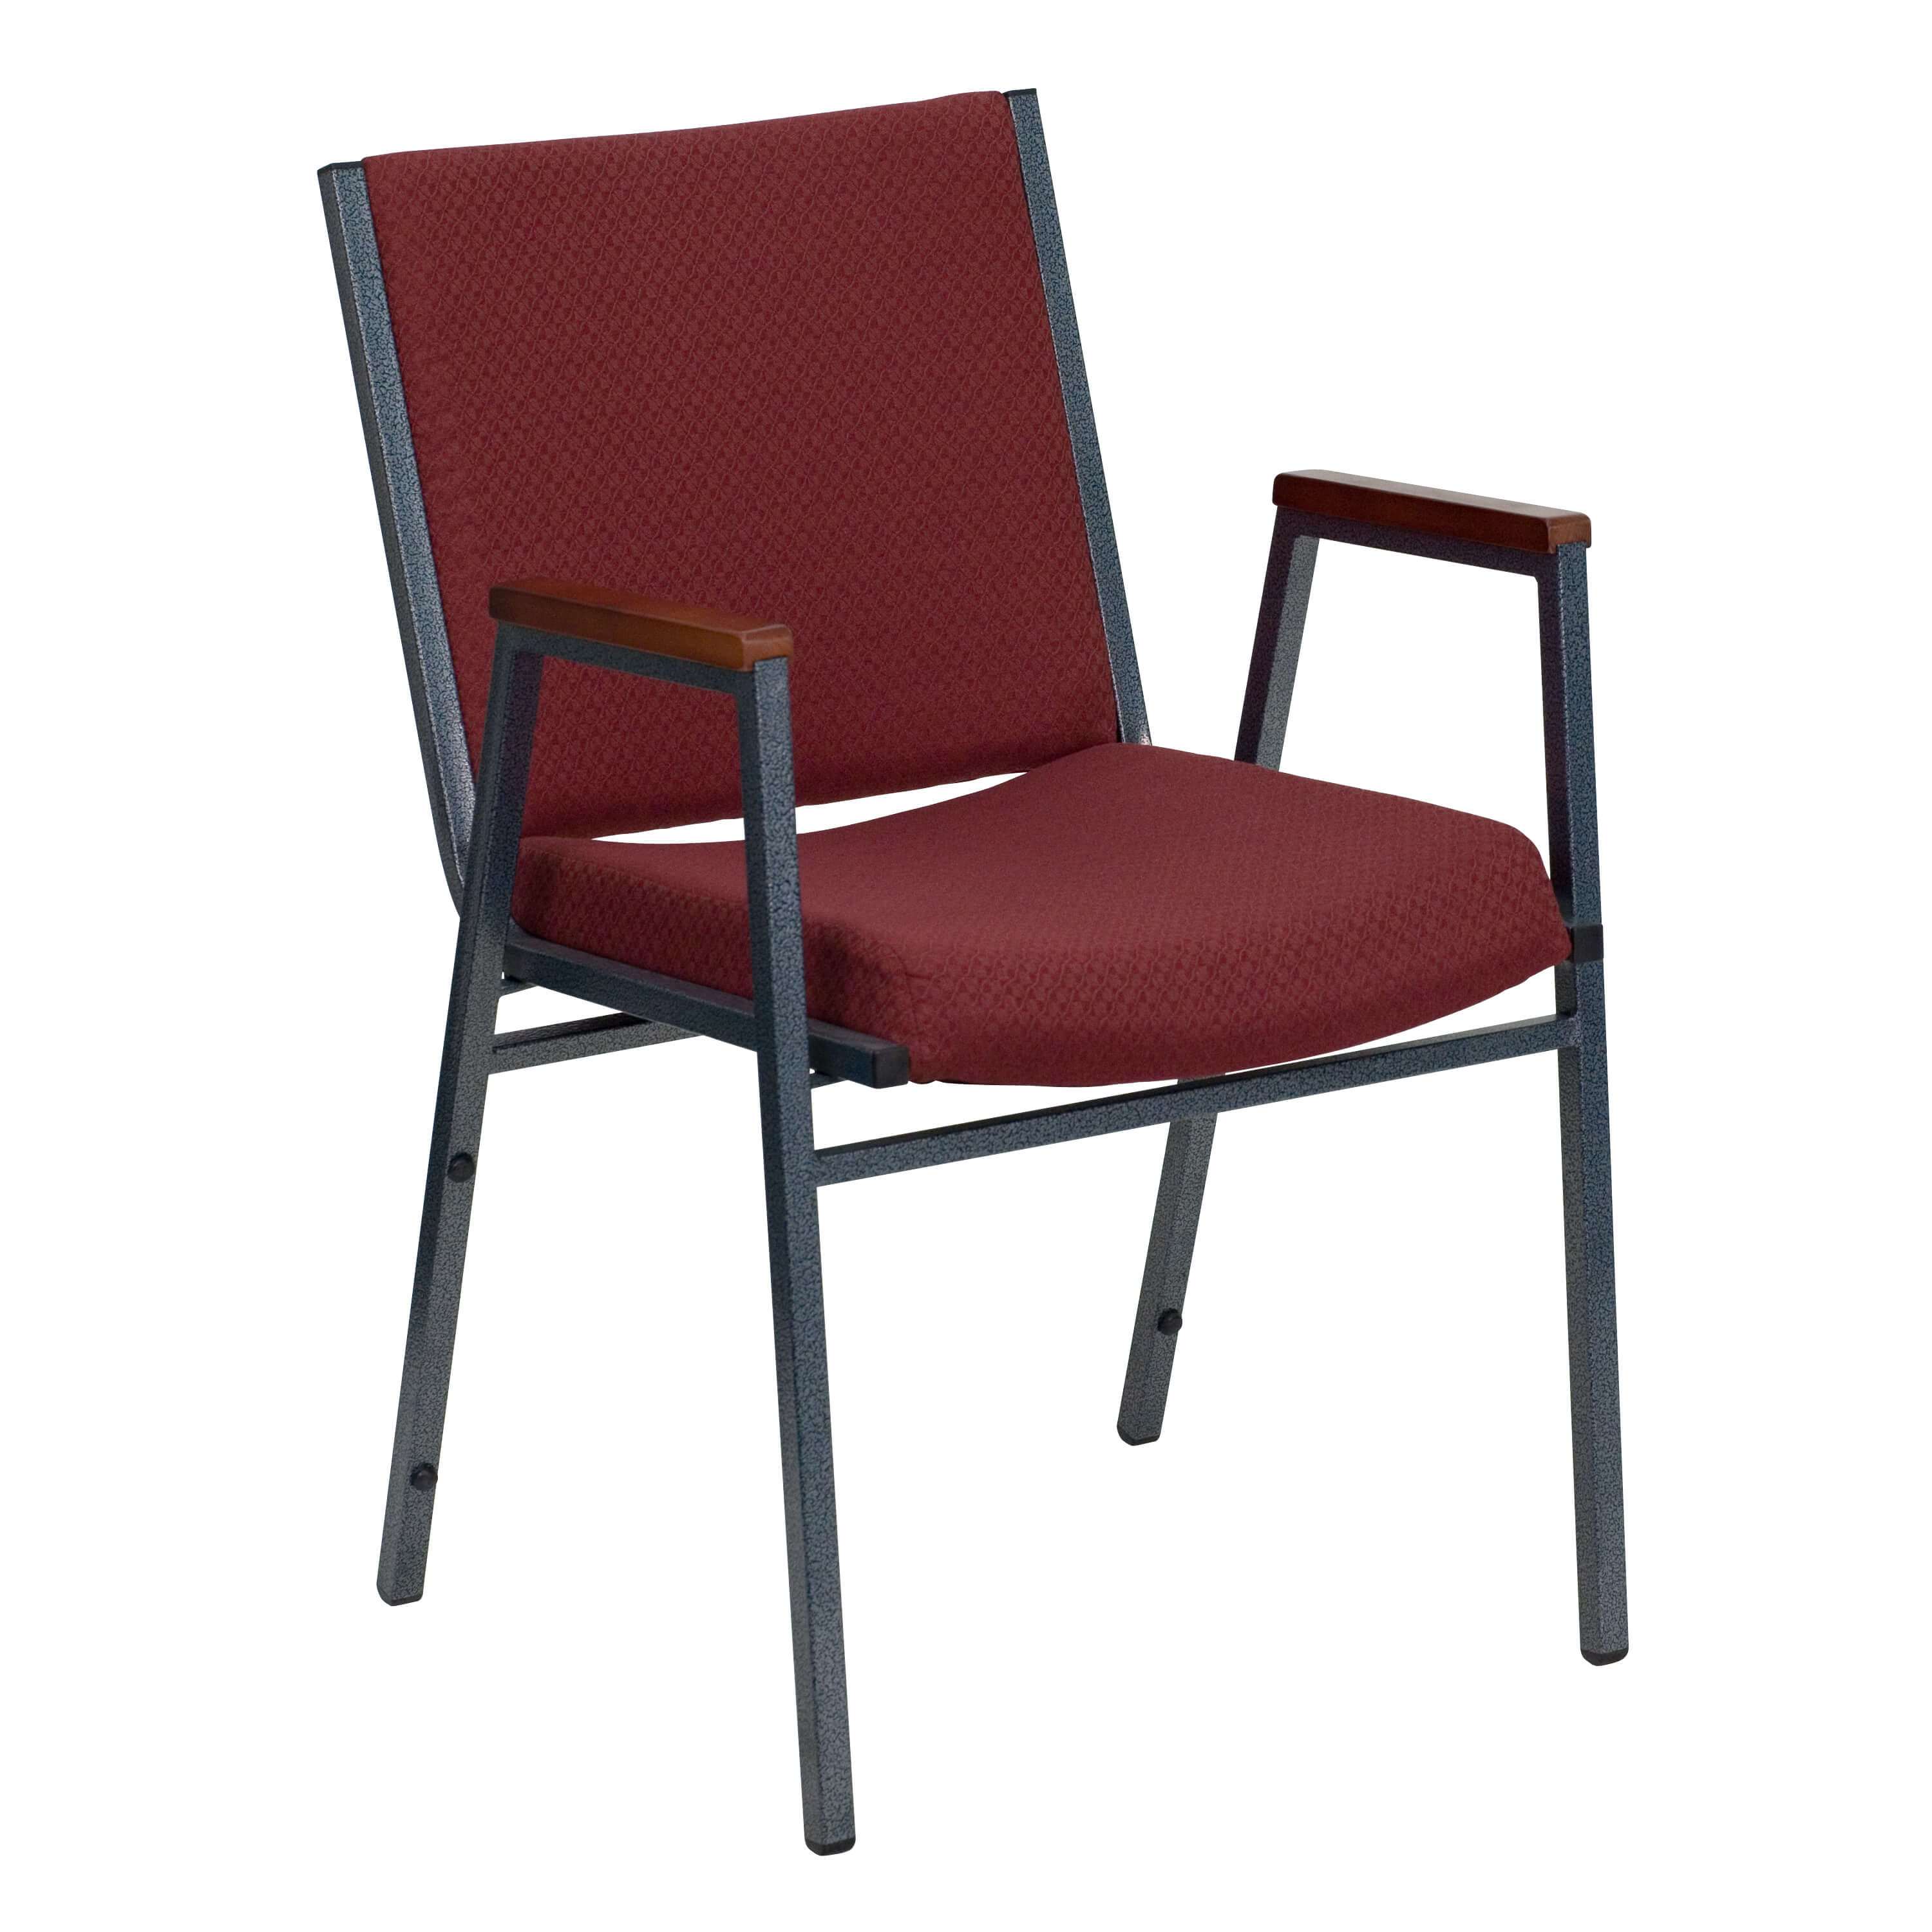 office-waiting-room-chairs-stackable-office-chairs.jpg